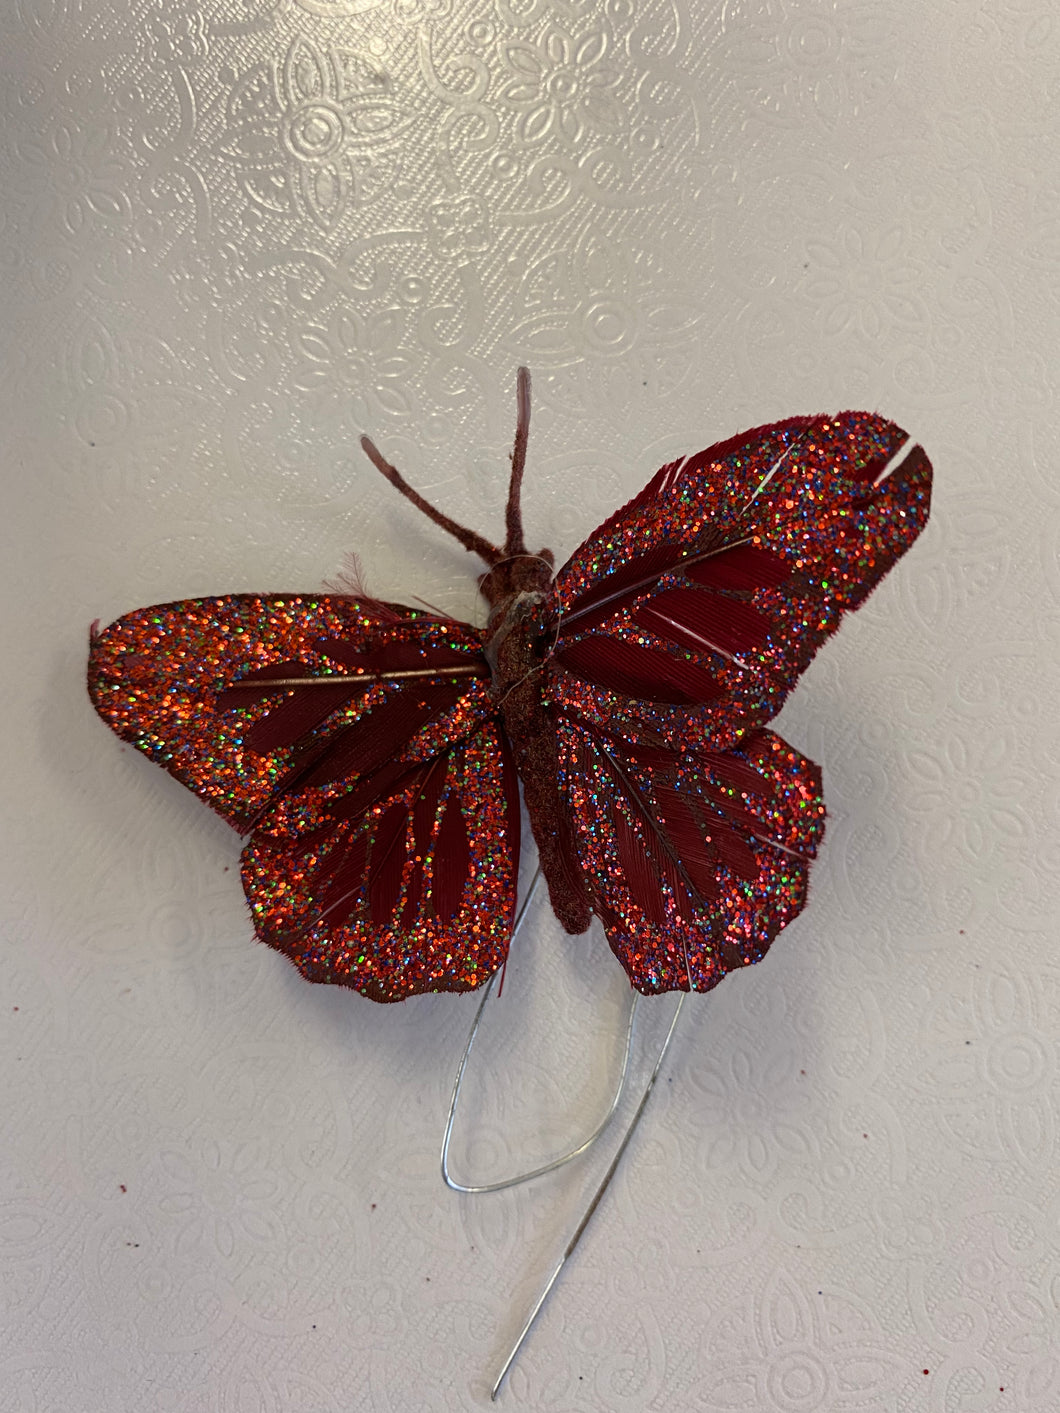 Removable Decoration - Claret/Wine Organza Butterfly with Clip